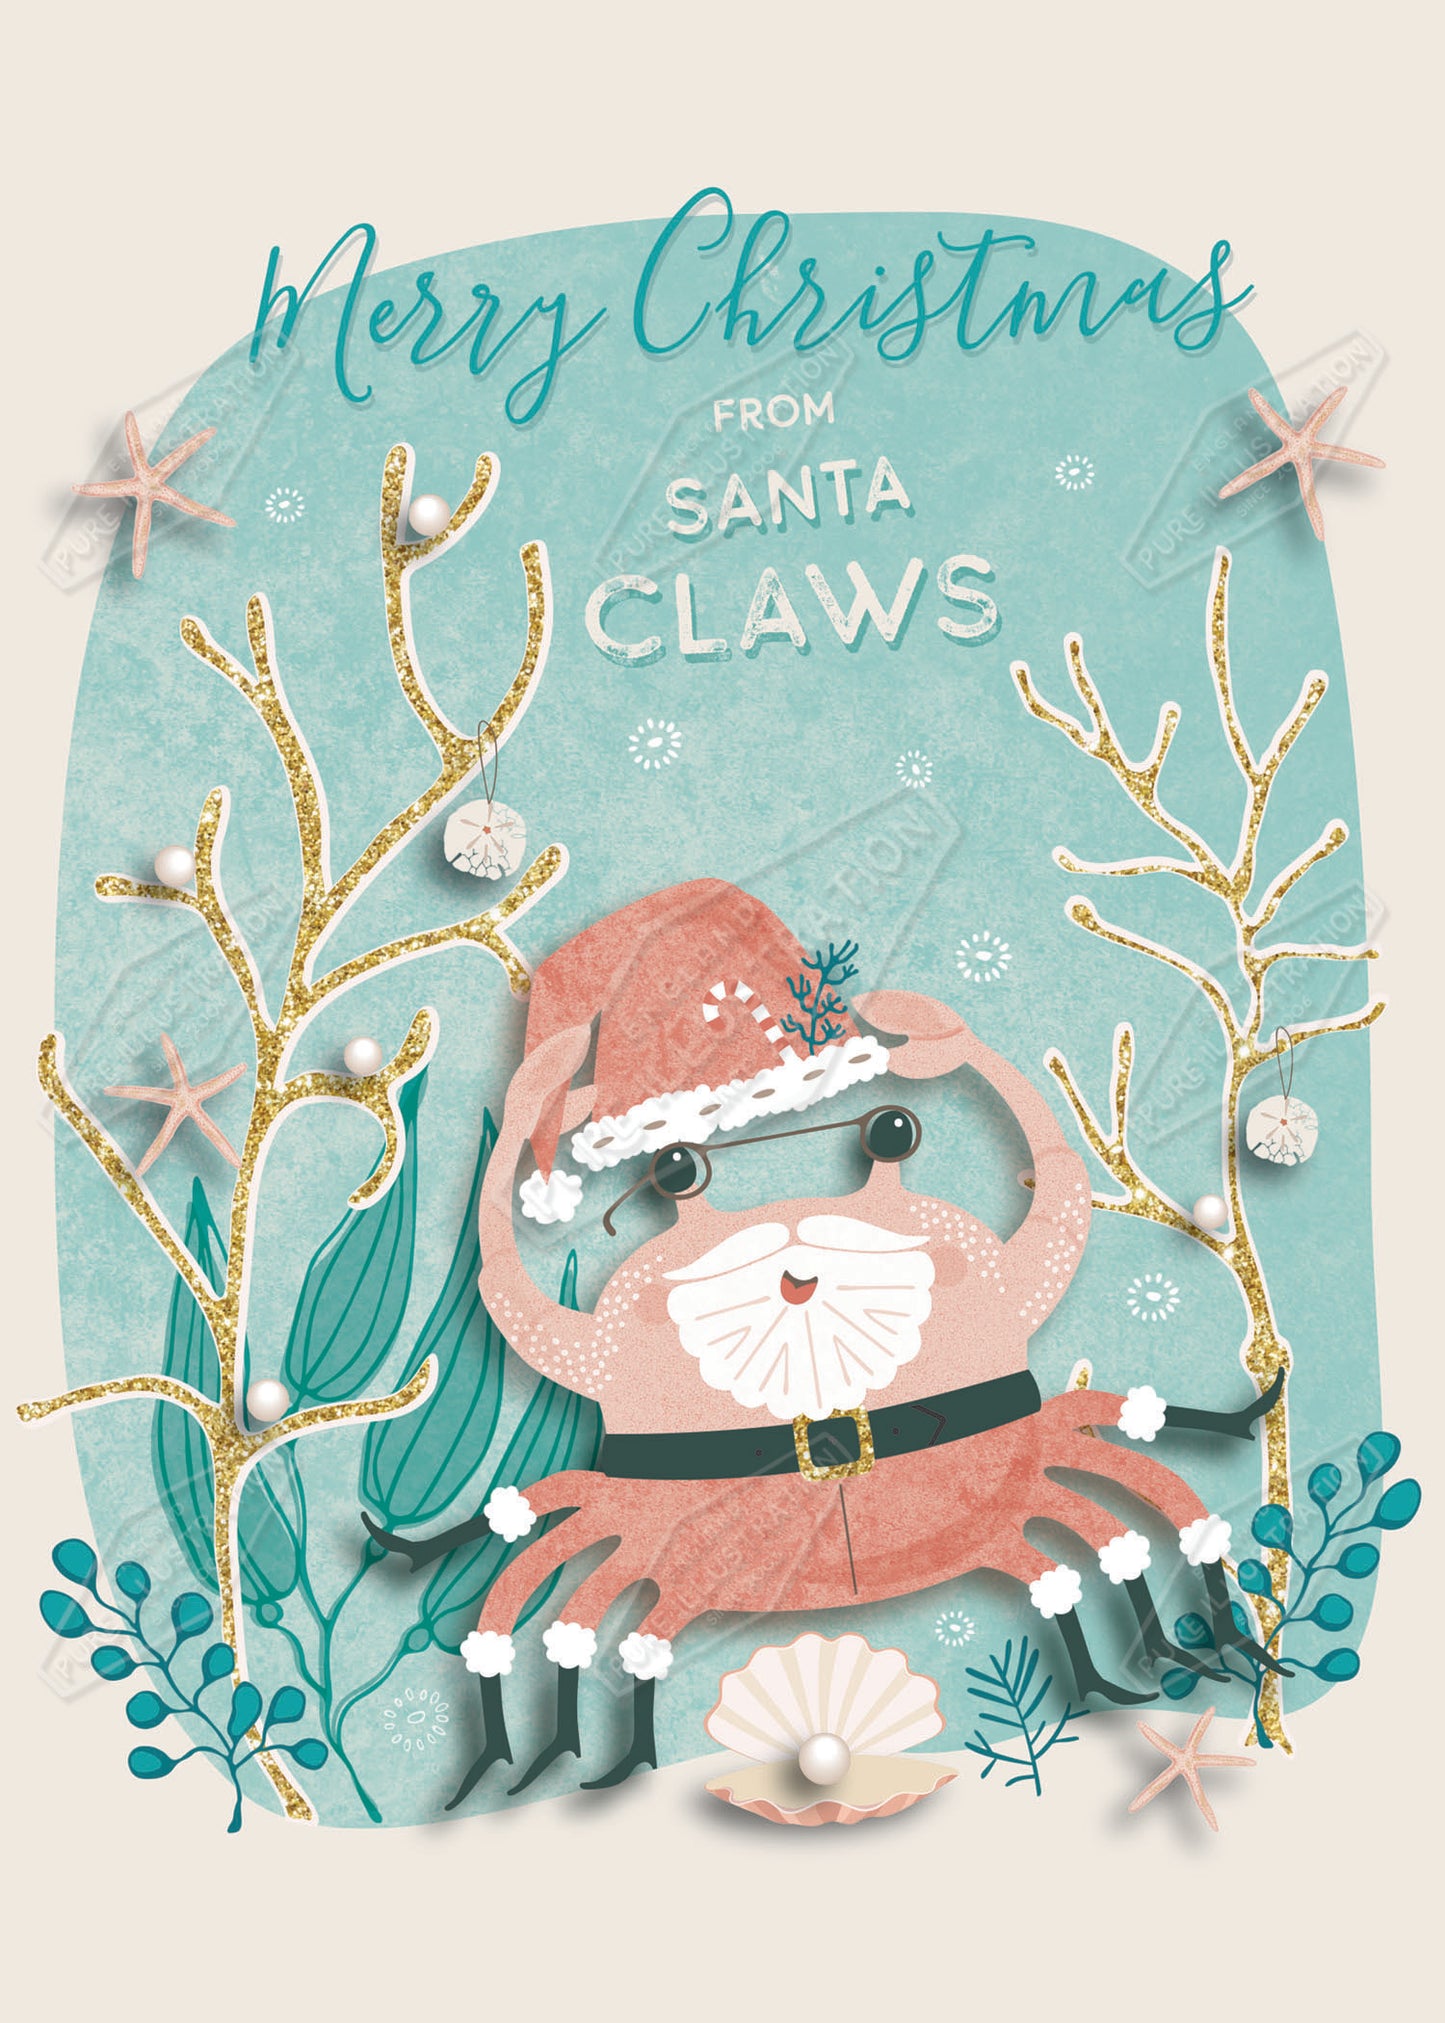 00034986GEG- Gill Eggleston is represented by Pure Art Licensing Agency - Christmas Greeting Card Design